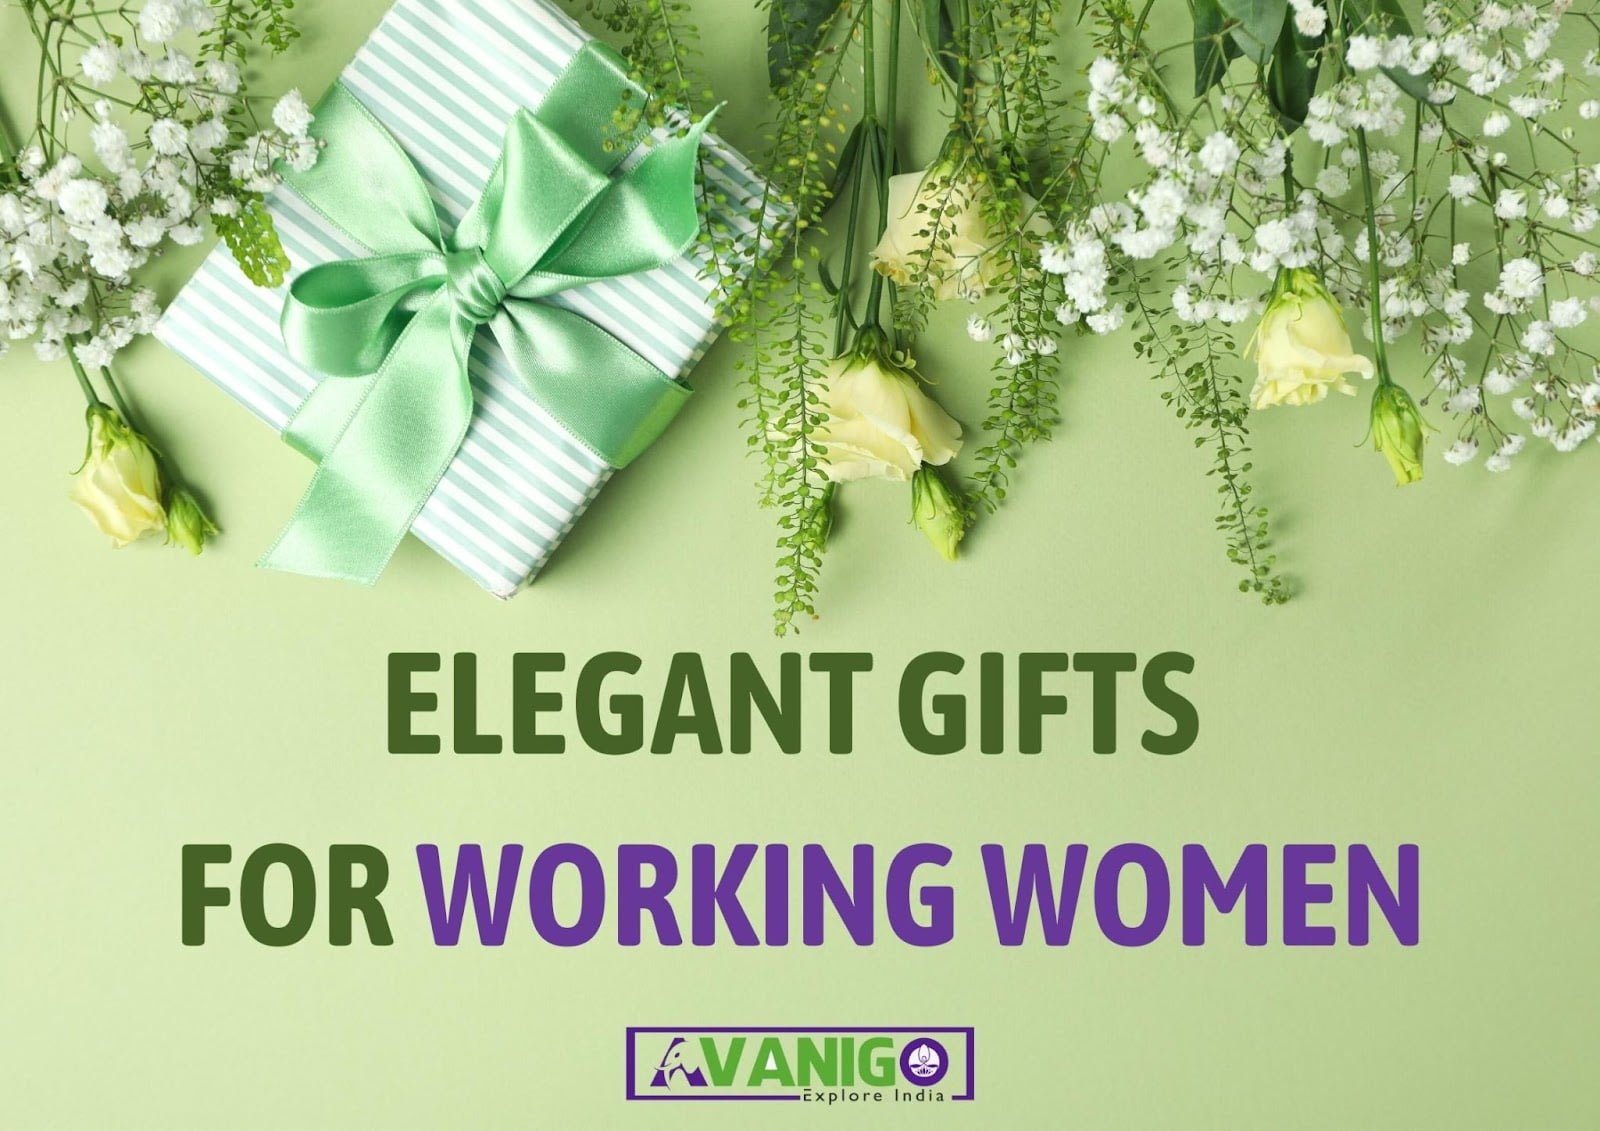 Women's Day Corporate Gift Ideas